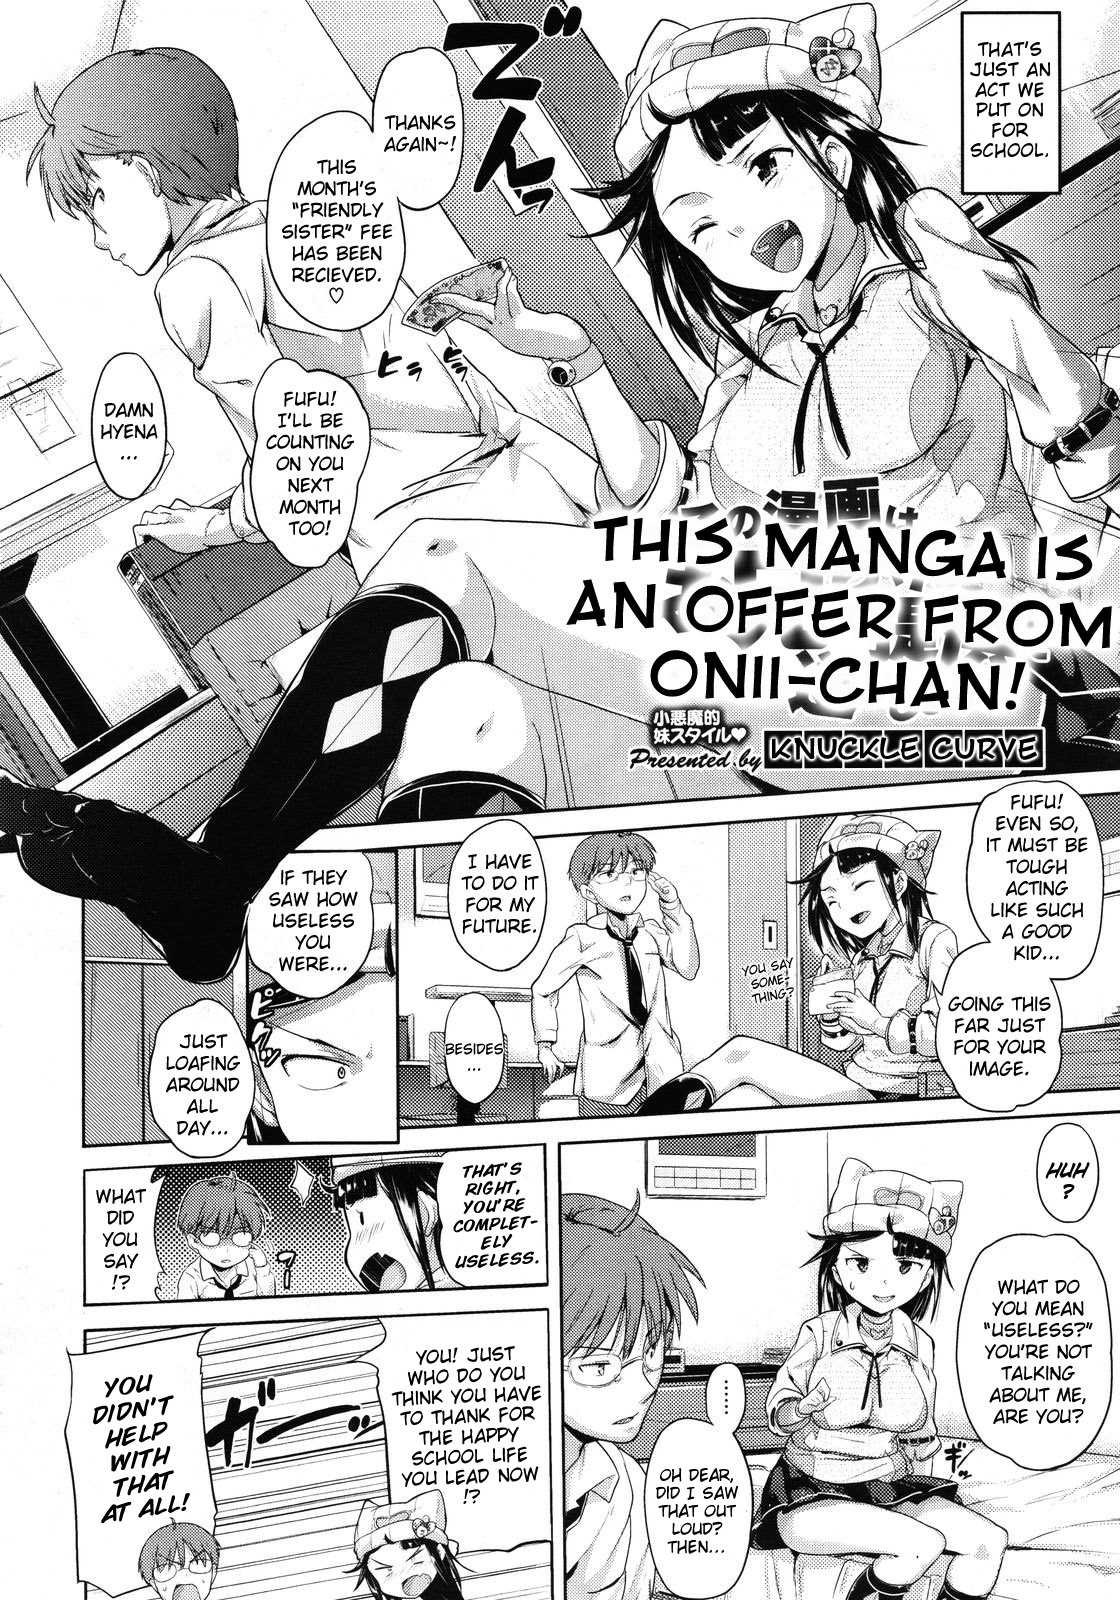 [Knuckle Curve] This Manga is an Offer From Onii-chan (English)  